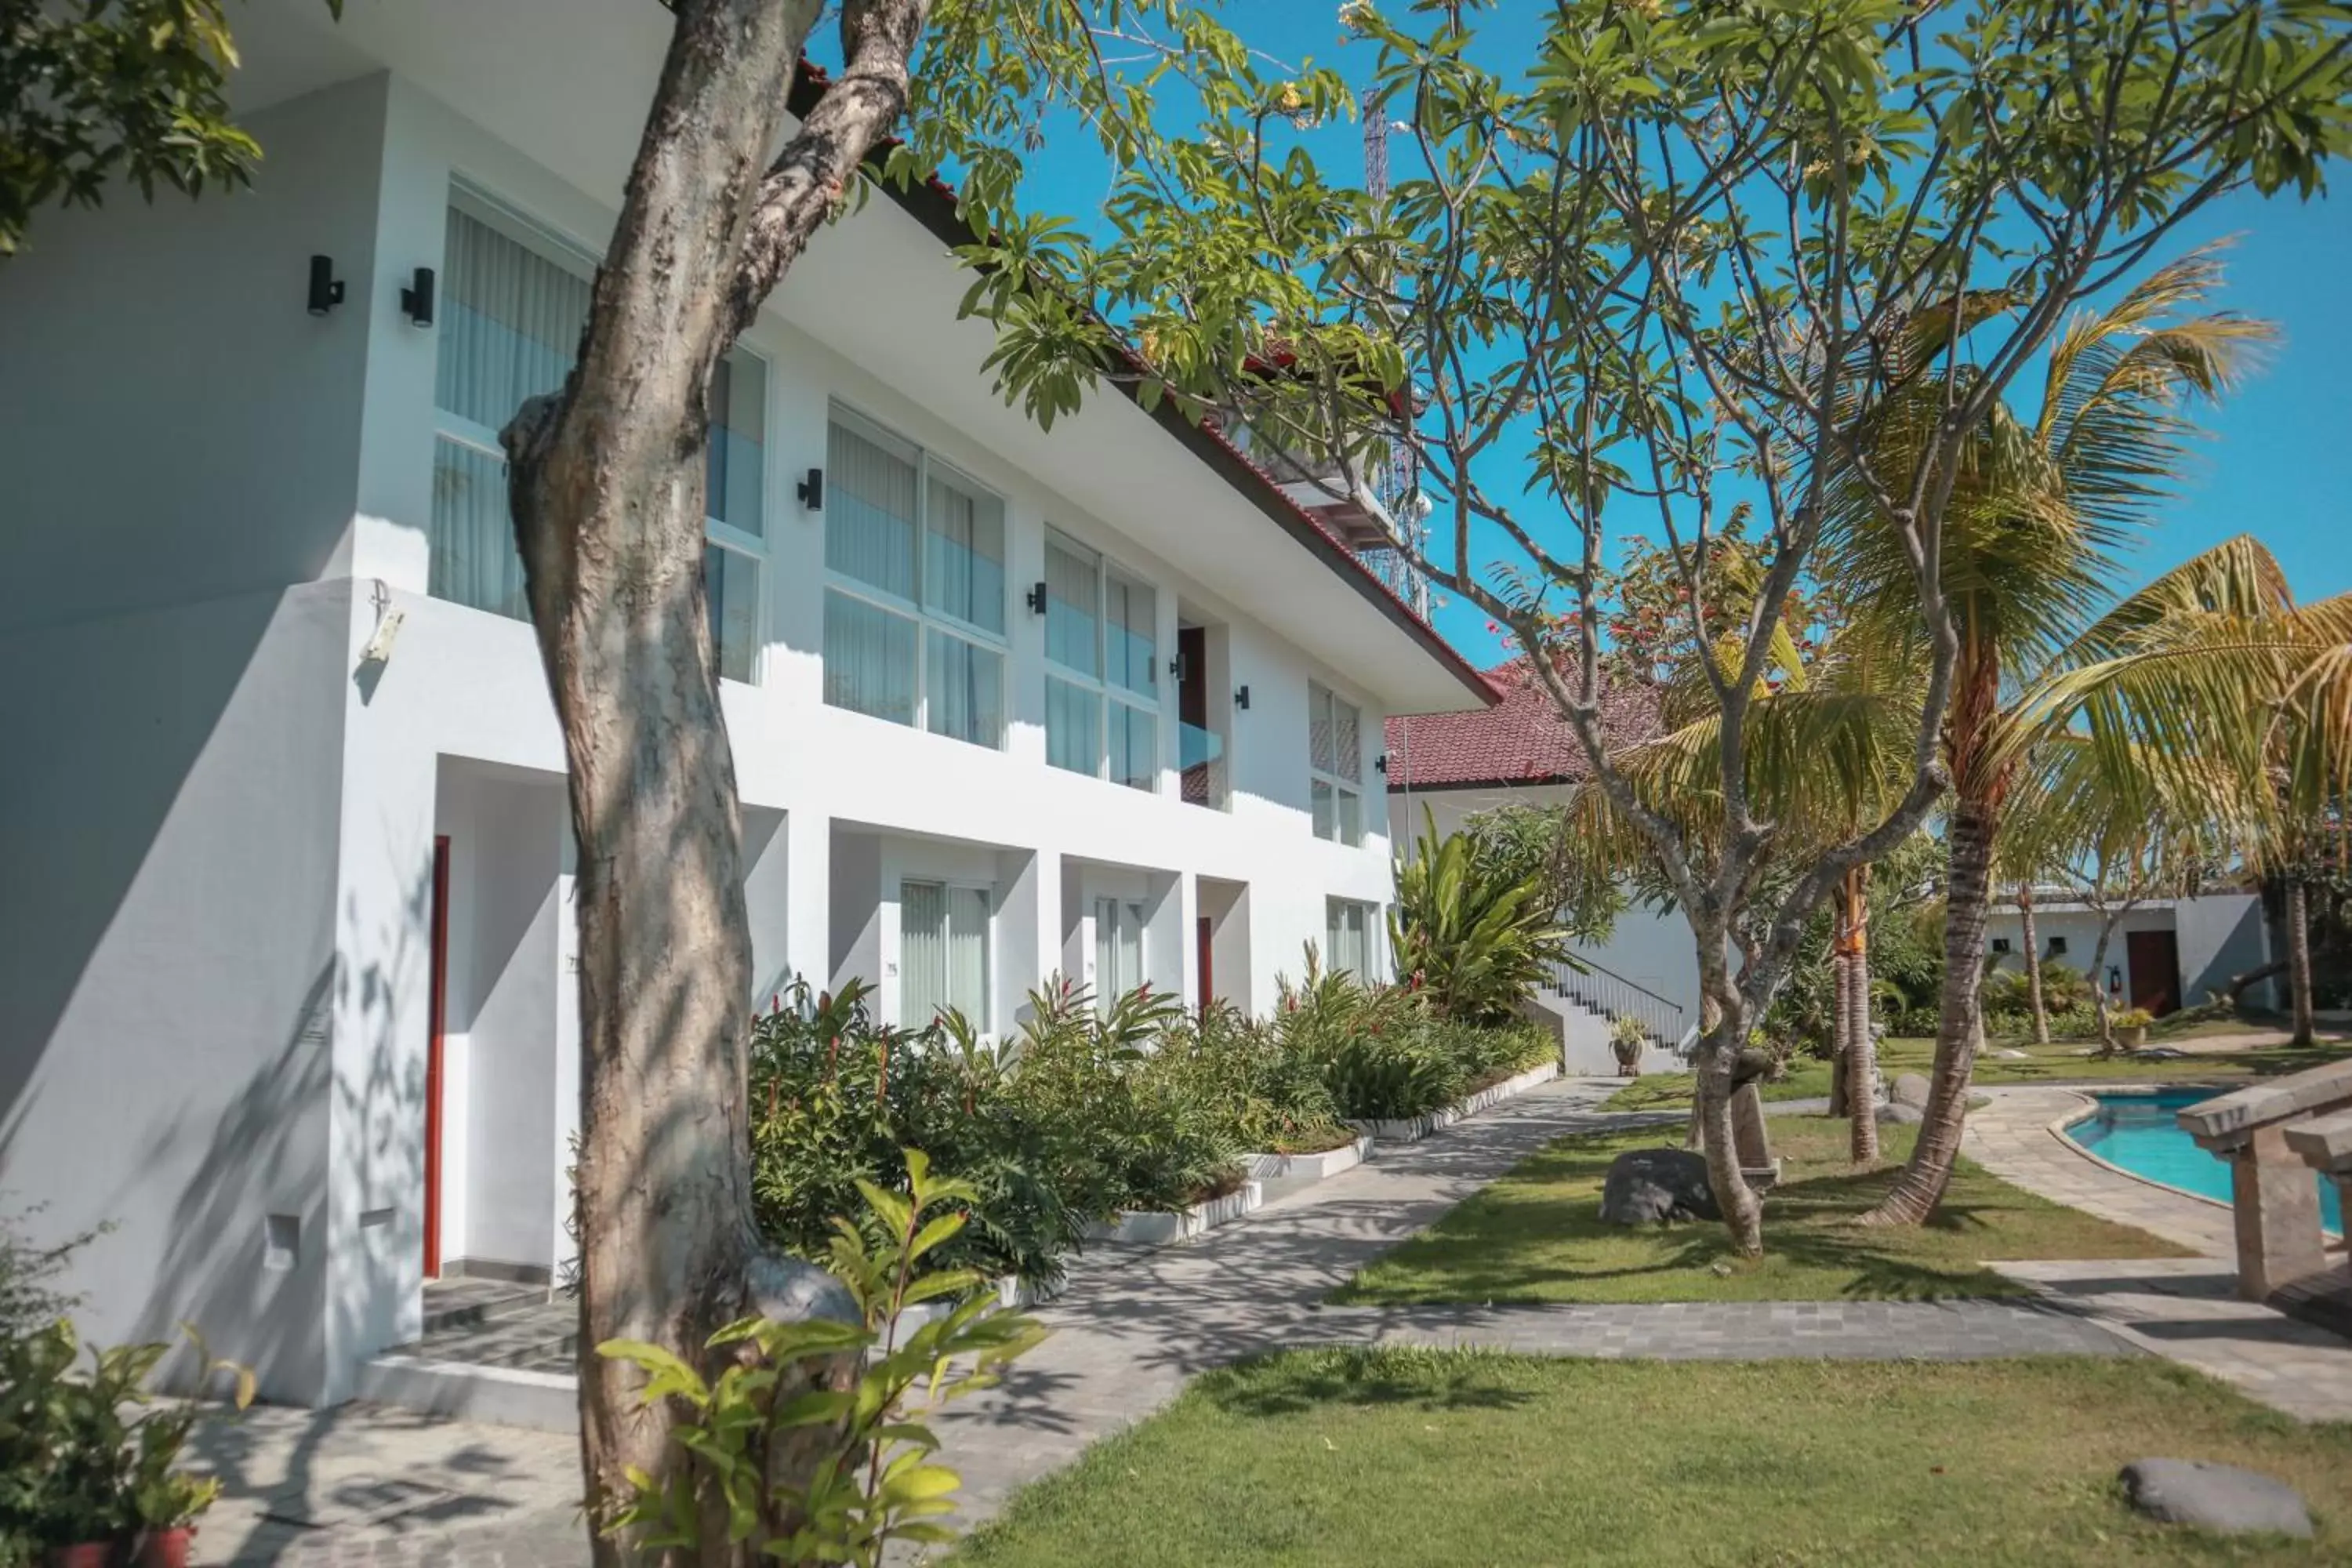 Property building, Garden in The Cakra Hotel